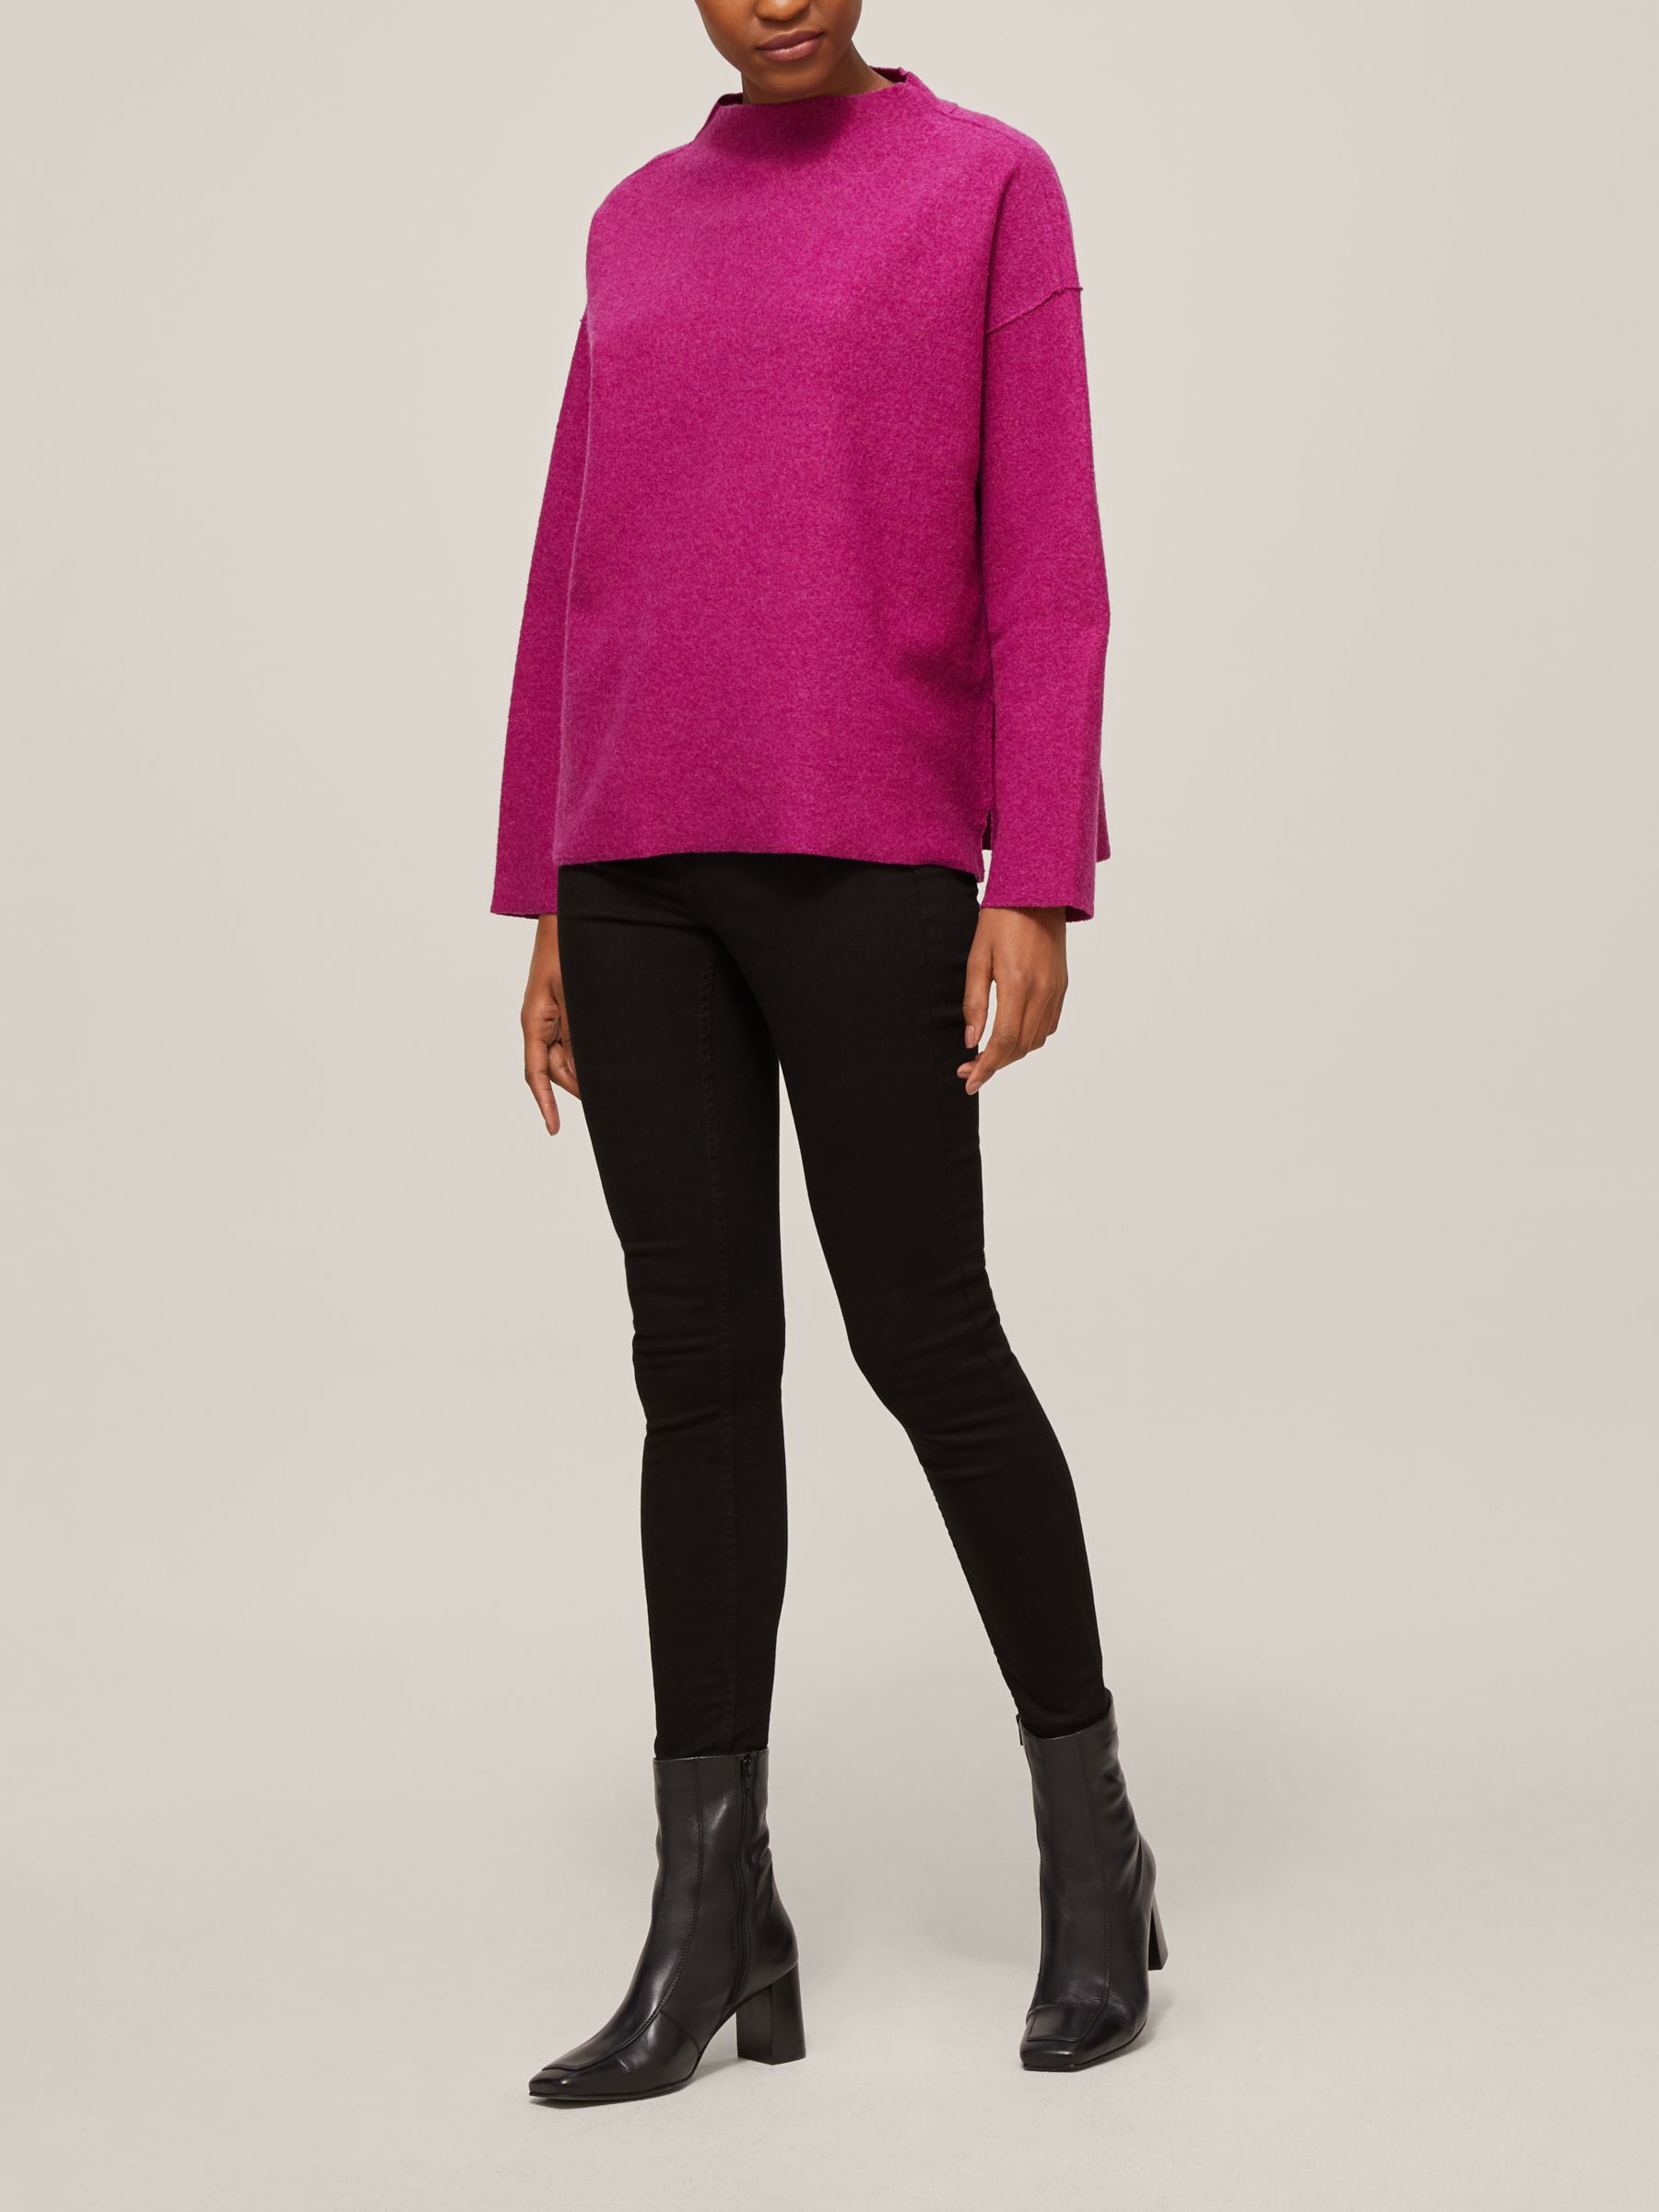 EILEEN FISHER Boiled Wool Funnel Neck Box Jumper, Cerise at John Lewis